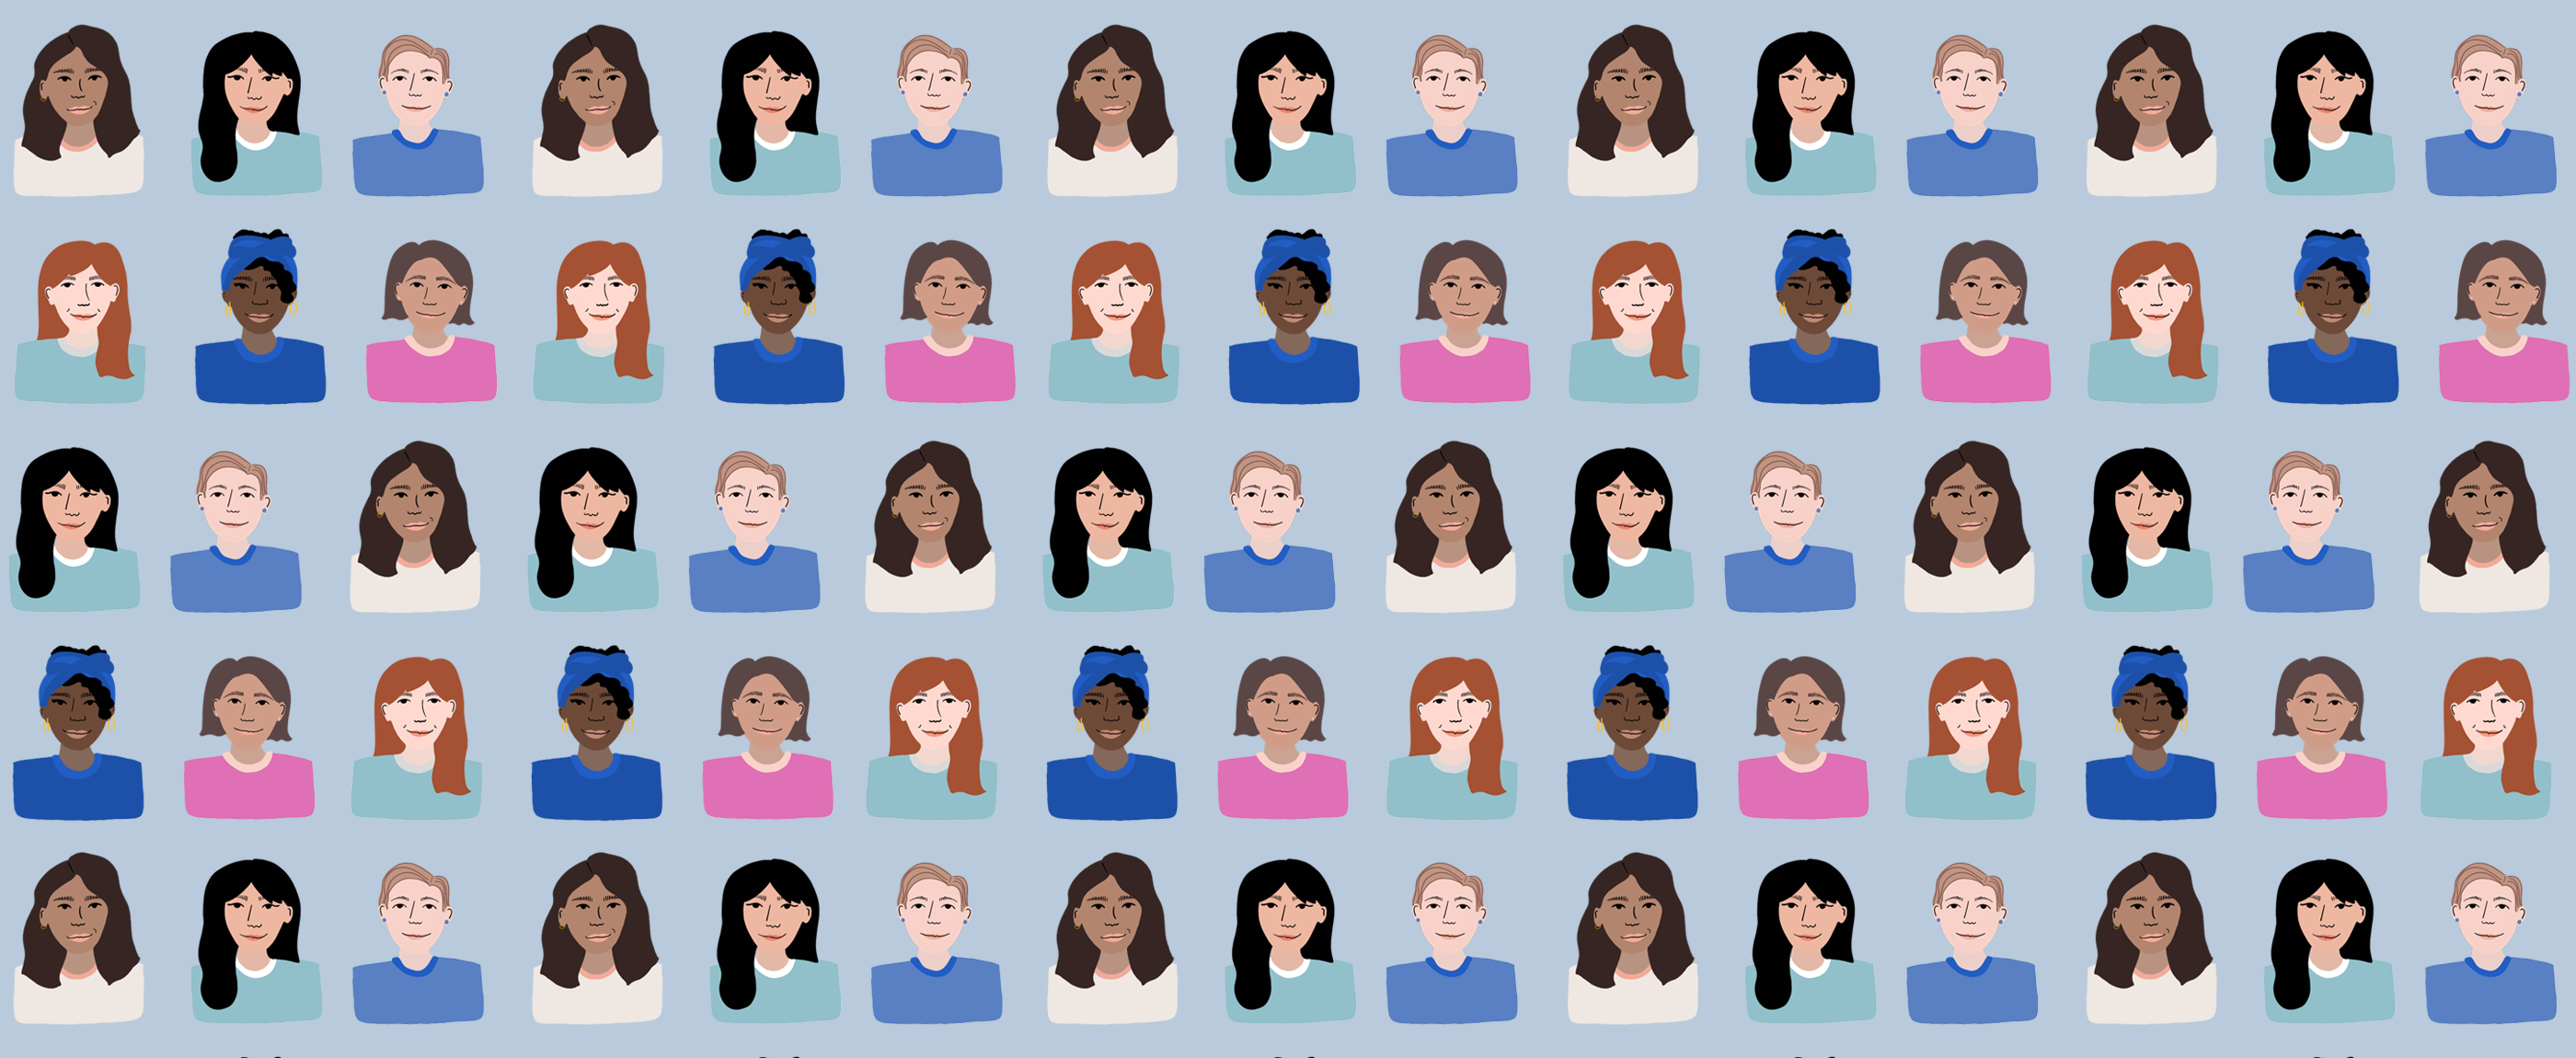 How Marketers Should Create Content with Diversity and Inclusion in Mind